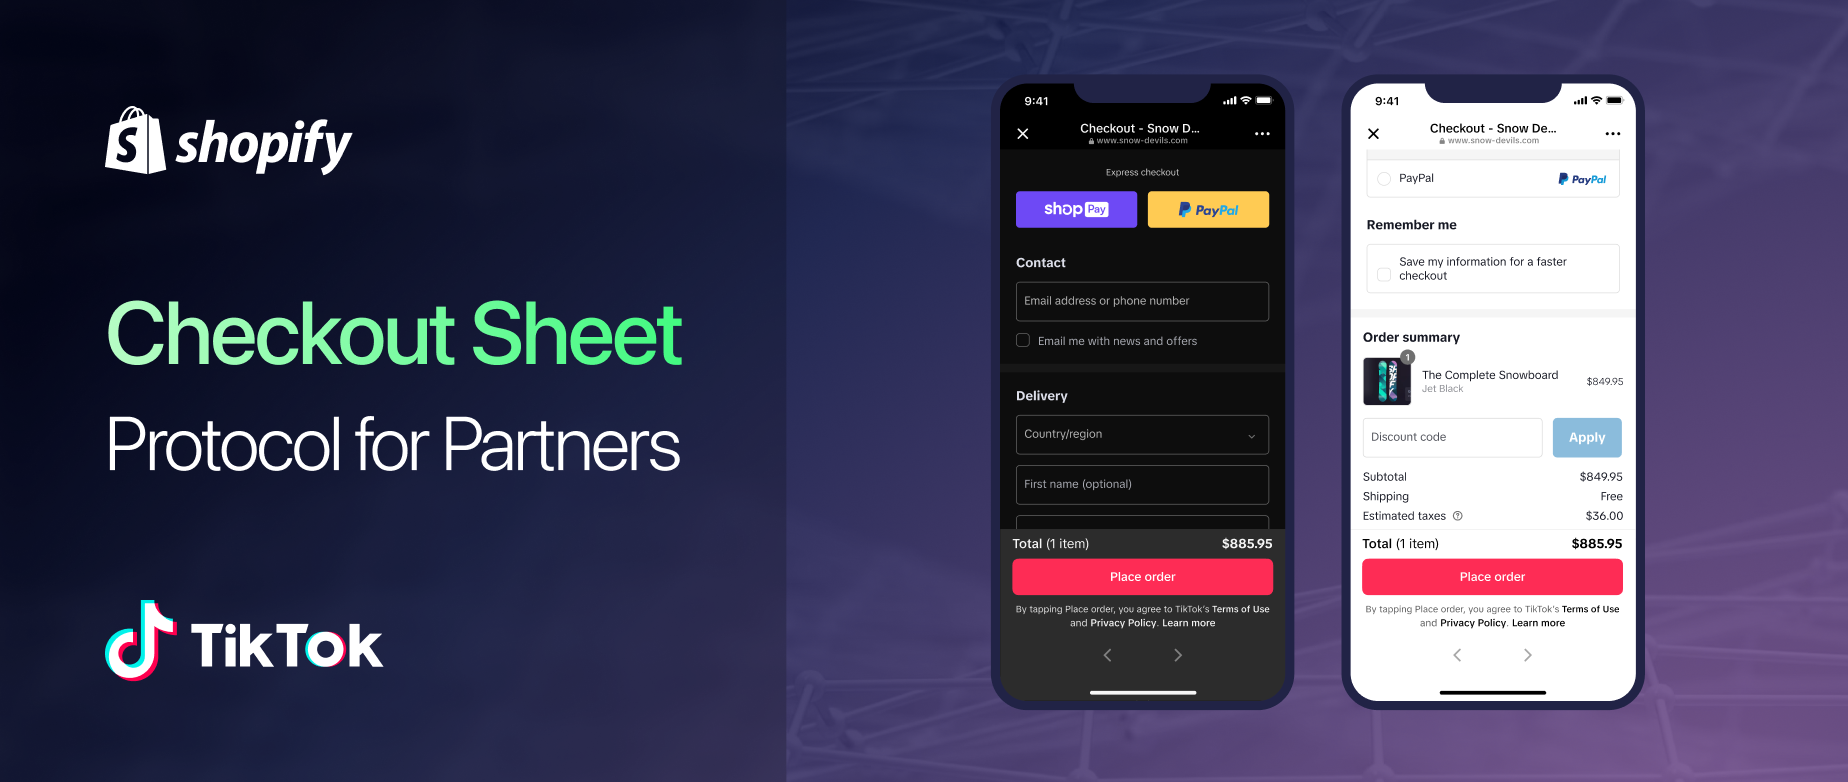 Build the world’s best checkout into your app with Shopify’s Checkout Sheet Protocol